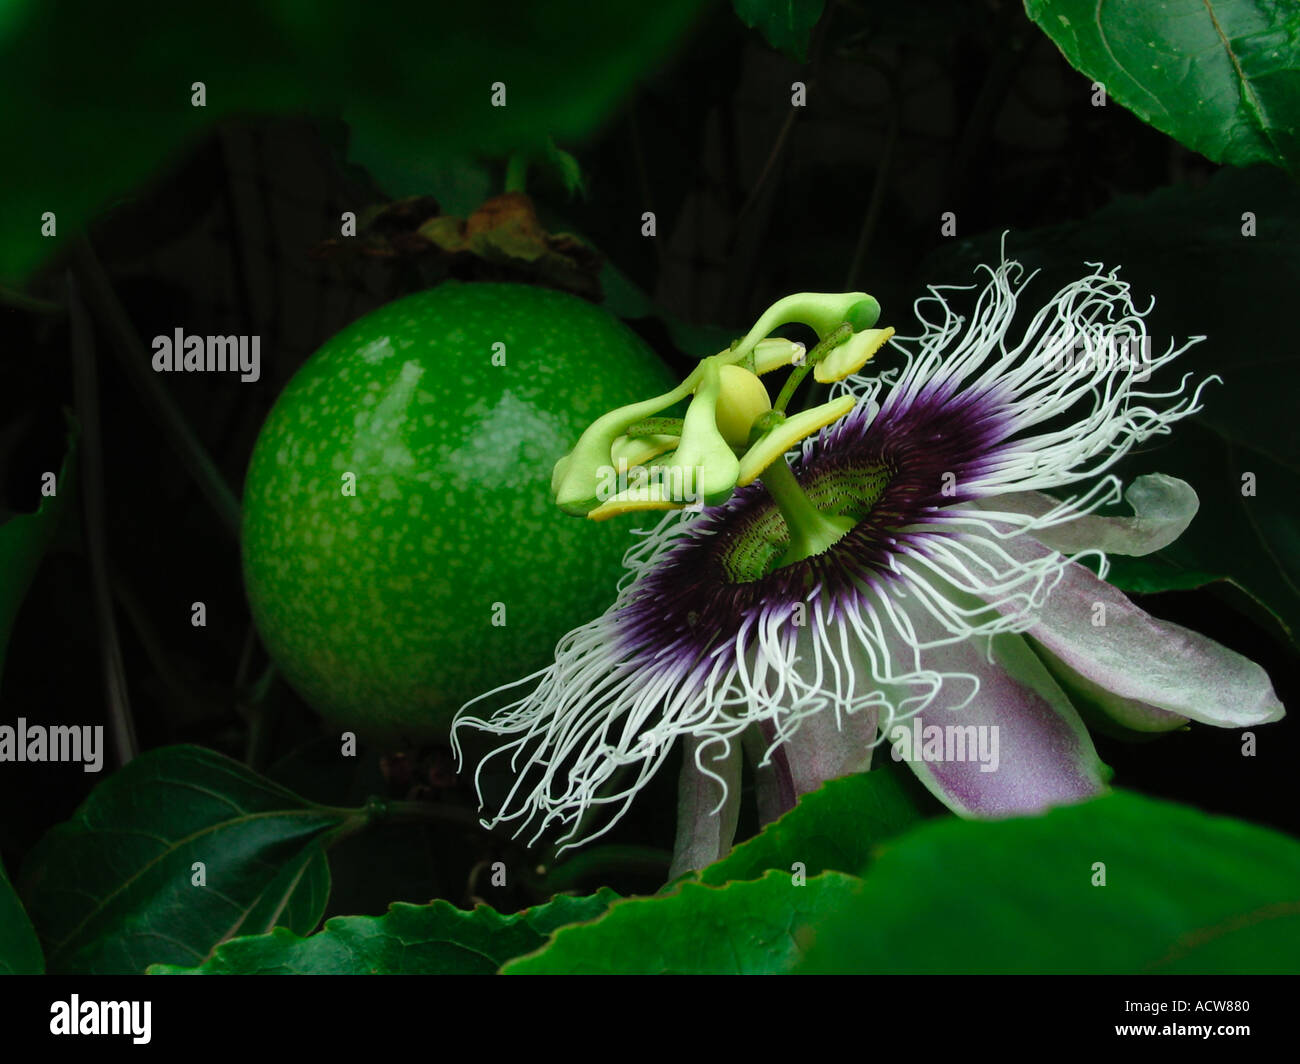 The exotic and alien looking passion flower and fruit. The name actually comes from the Passion of Christ not from love. Stock Photo